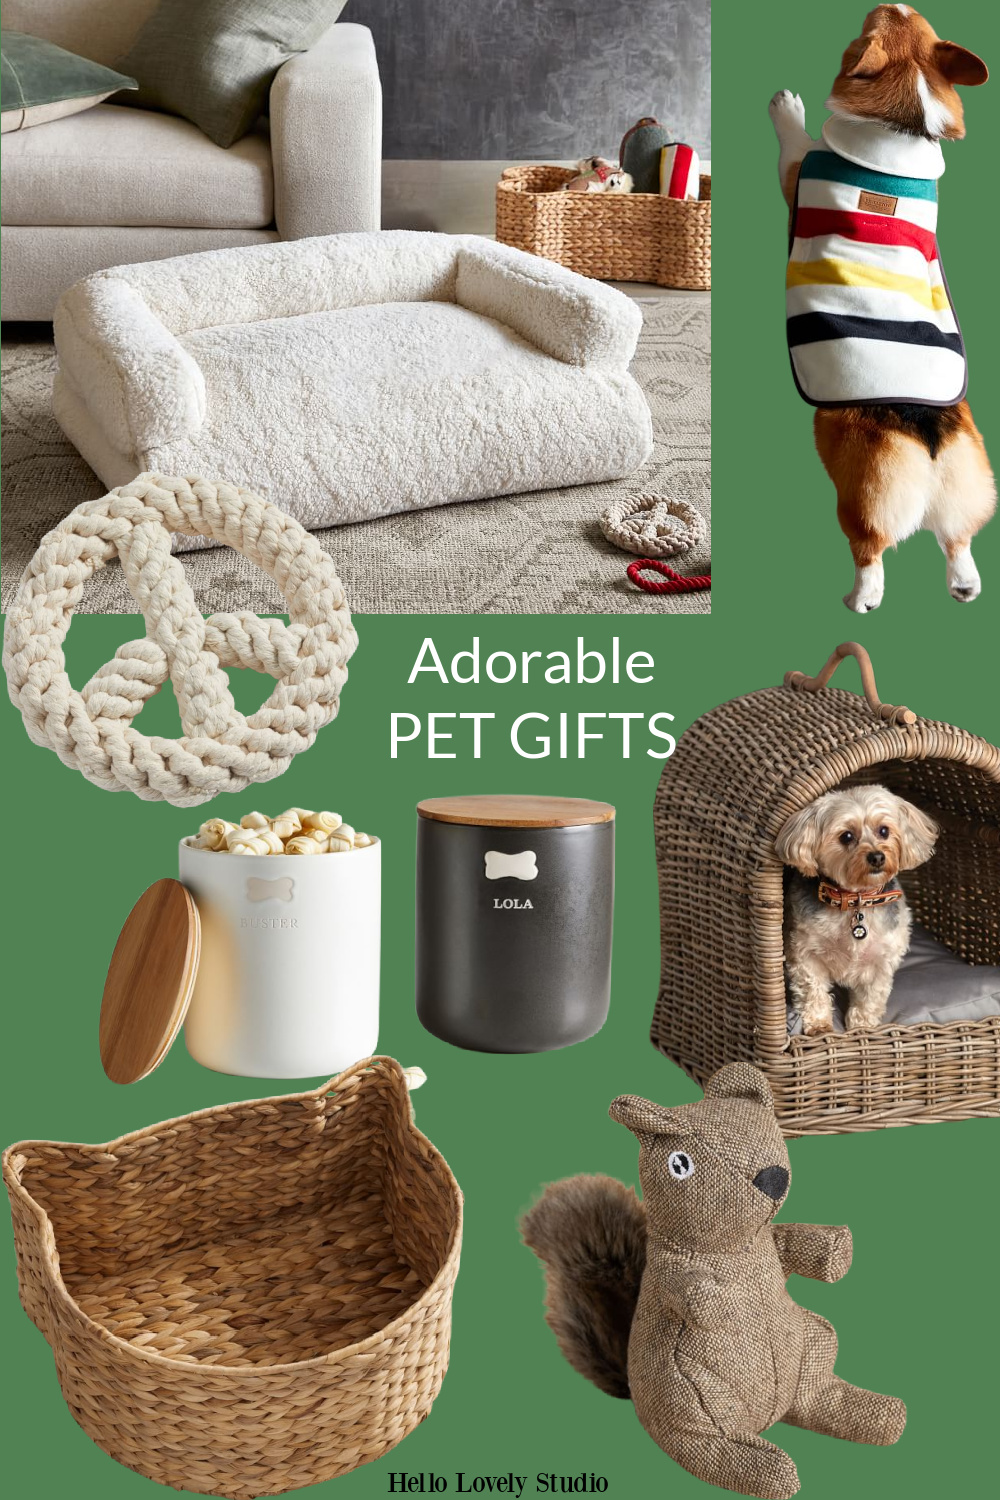 Adorable Pet Gifts - Hello Lovely Studio. #petgifts #doggifts